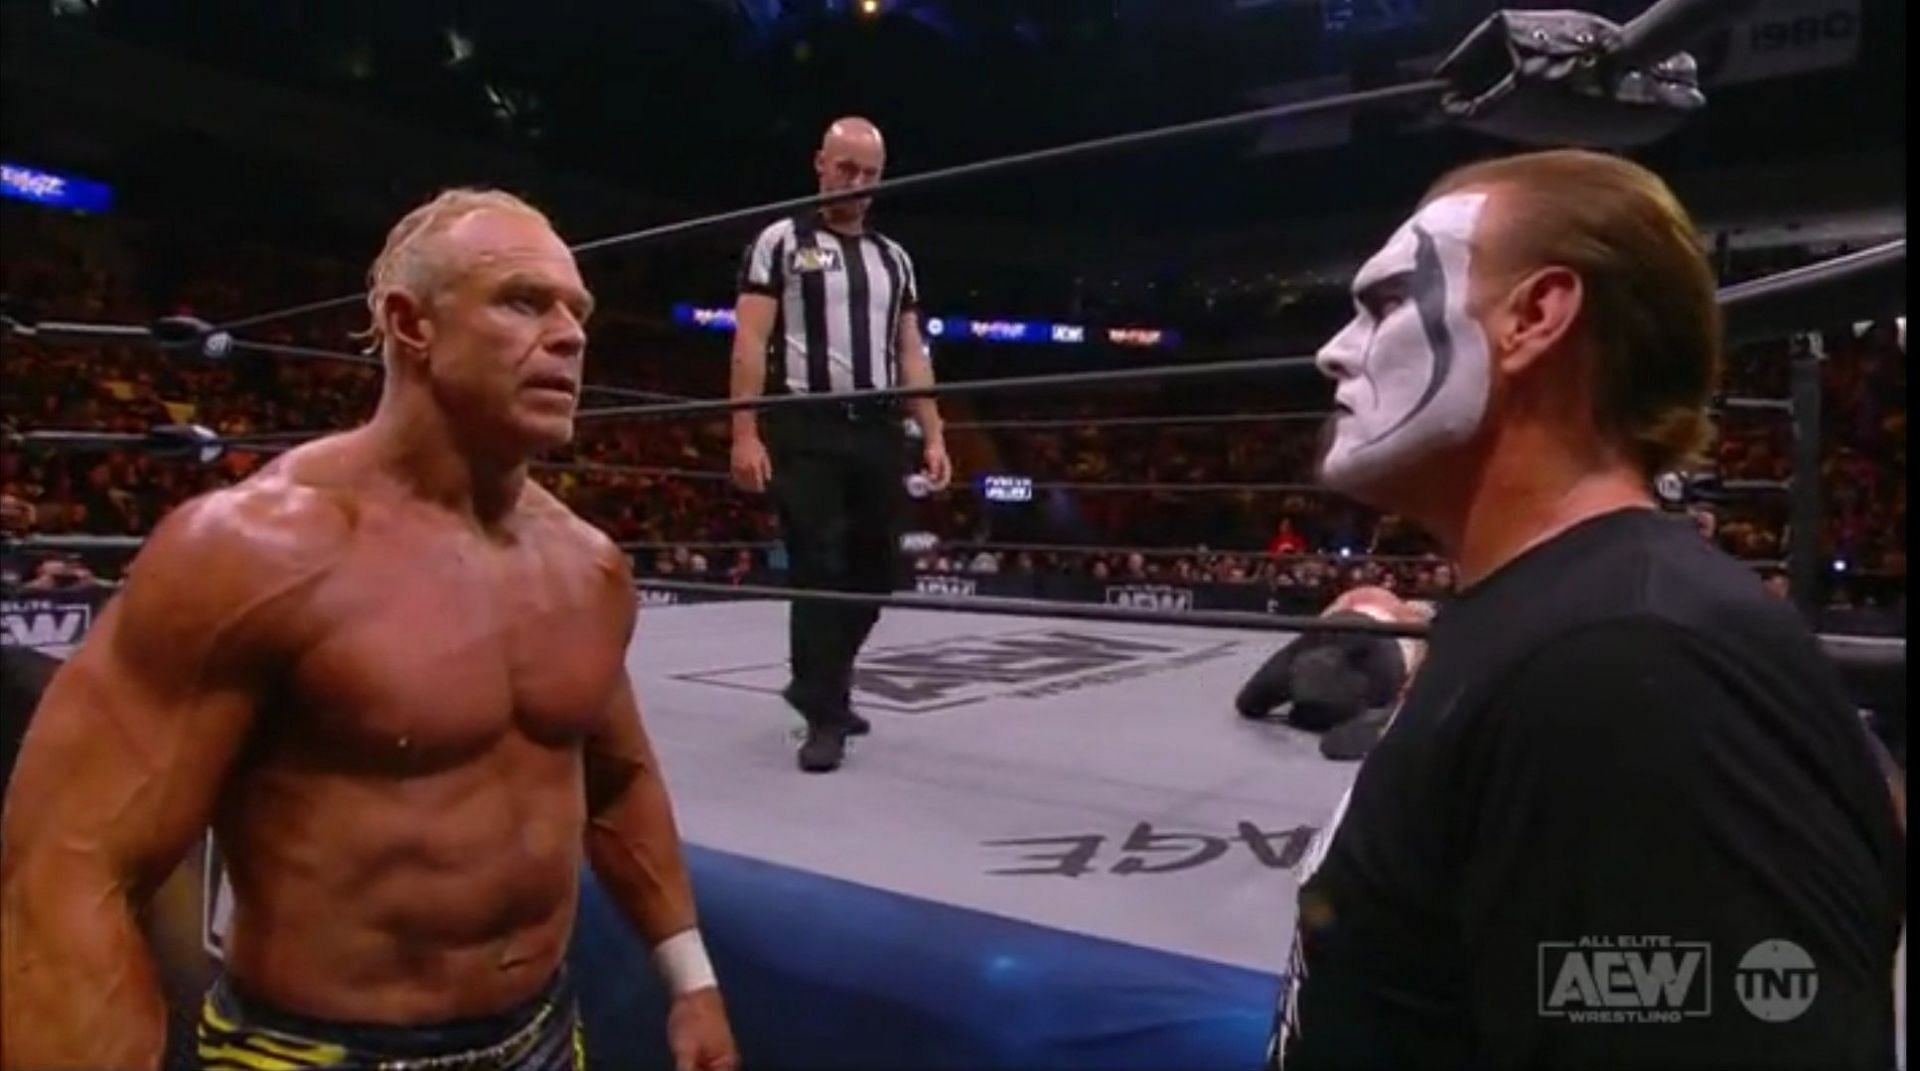 Is Sting gearing up for another match?